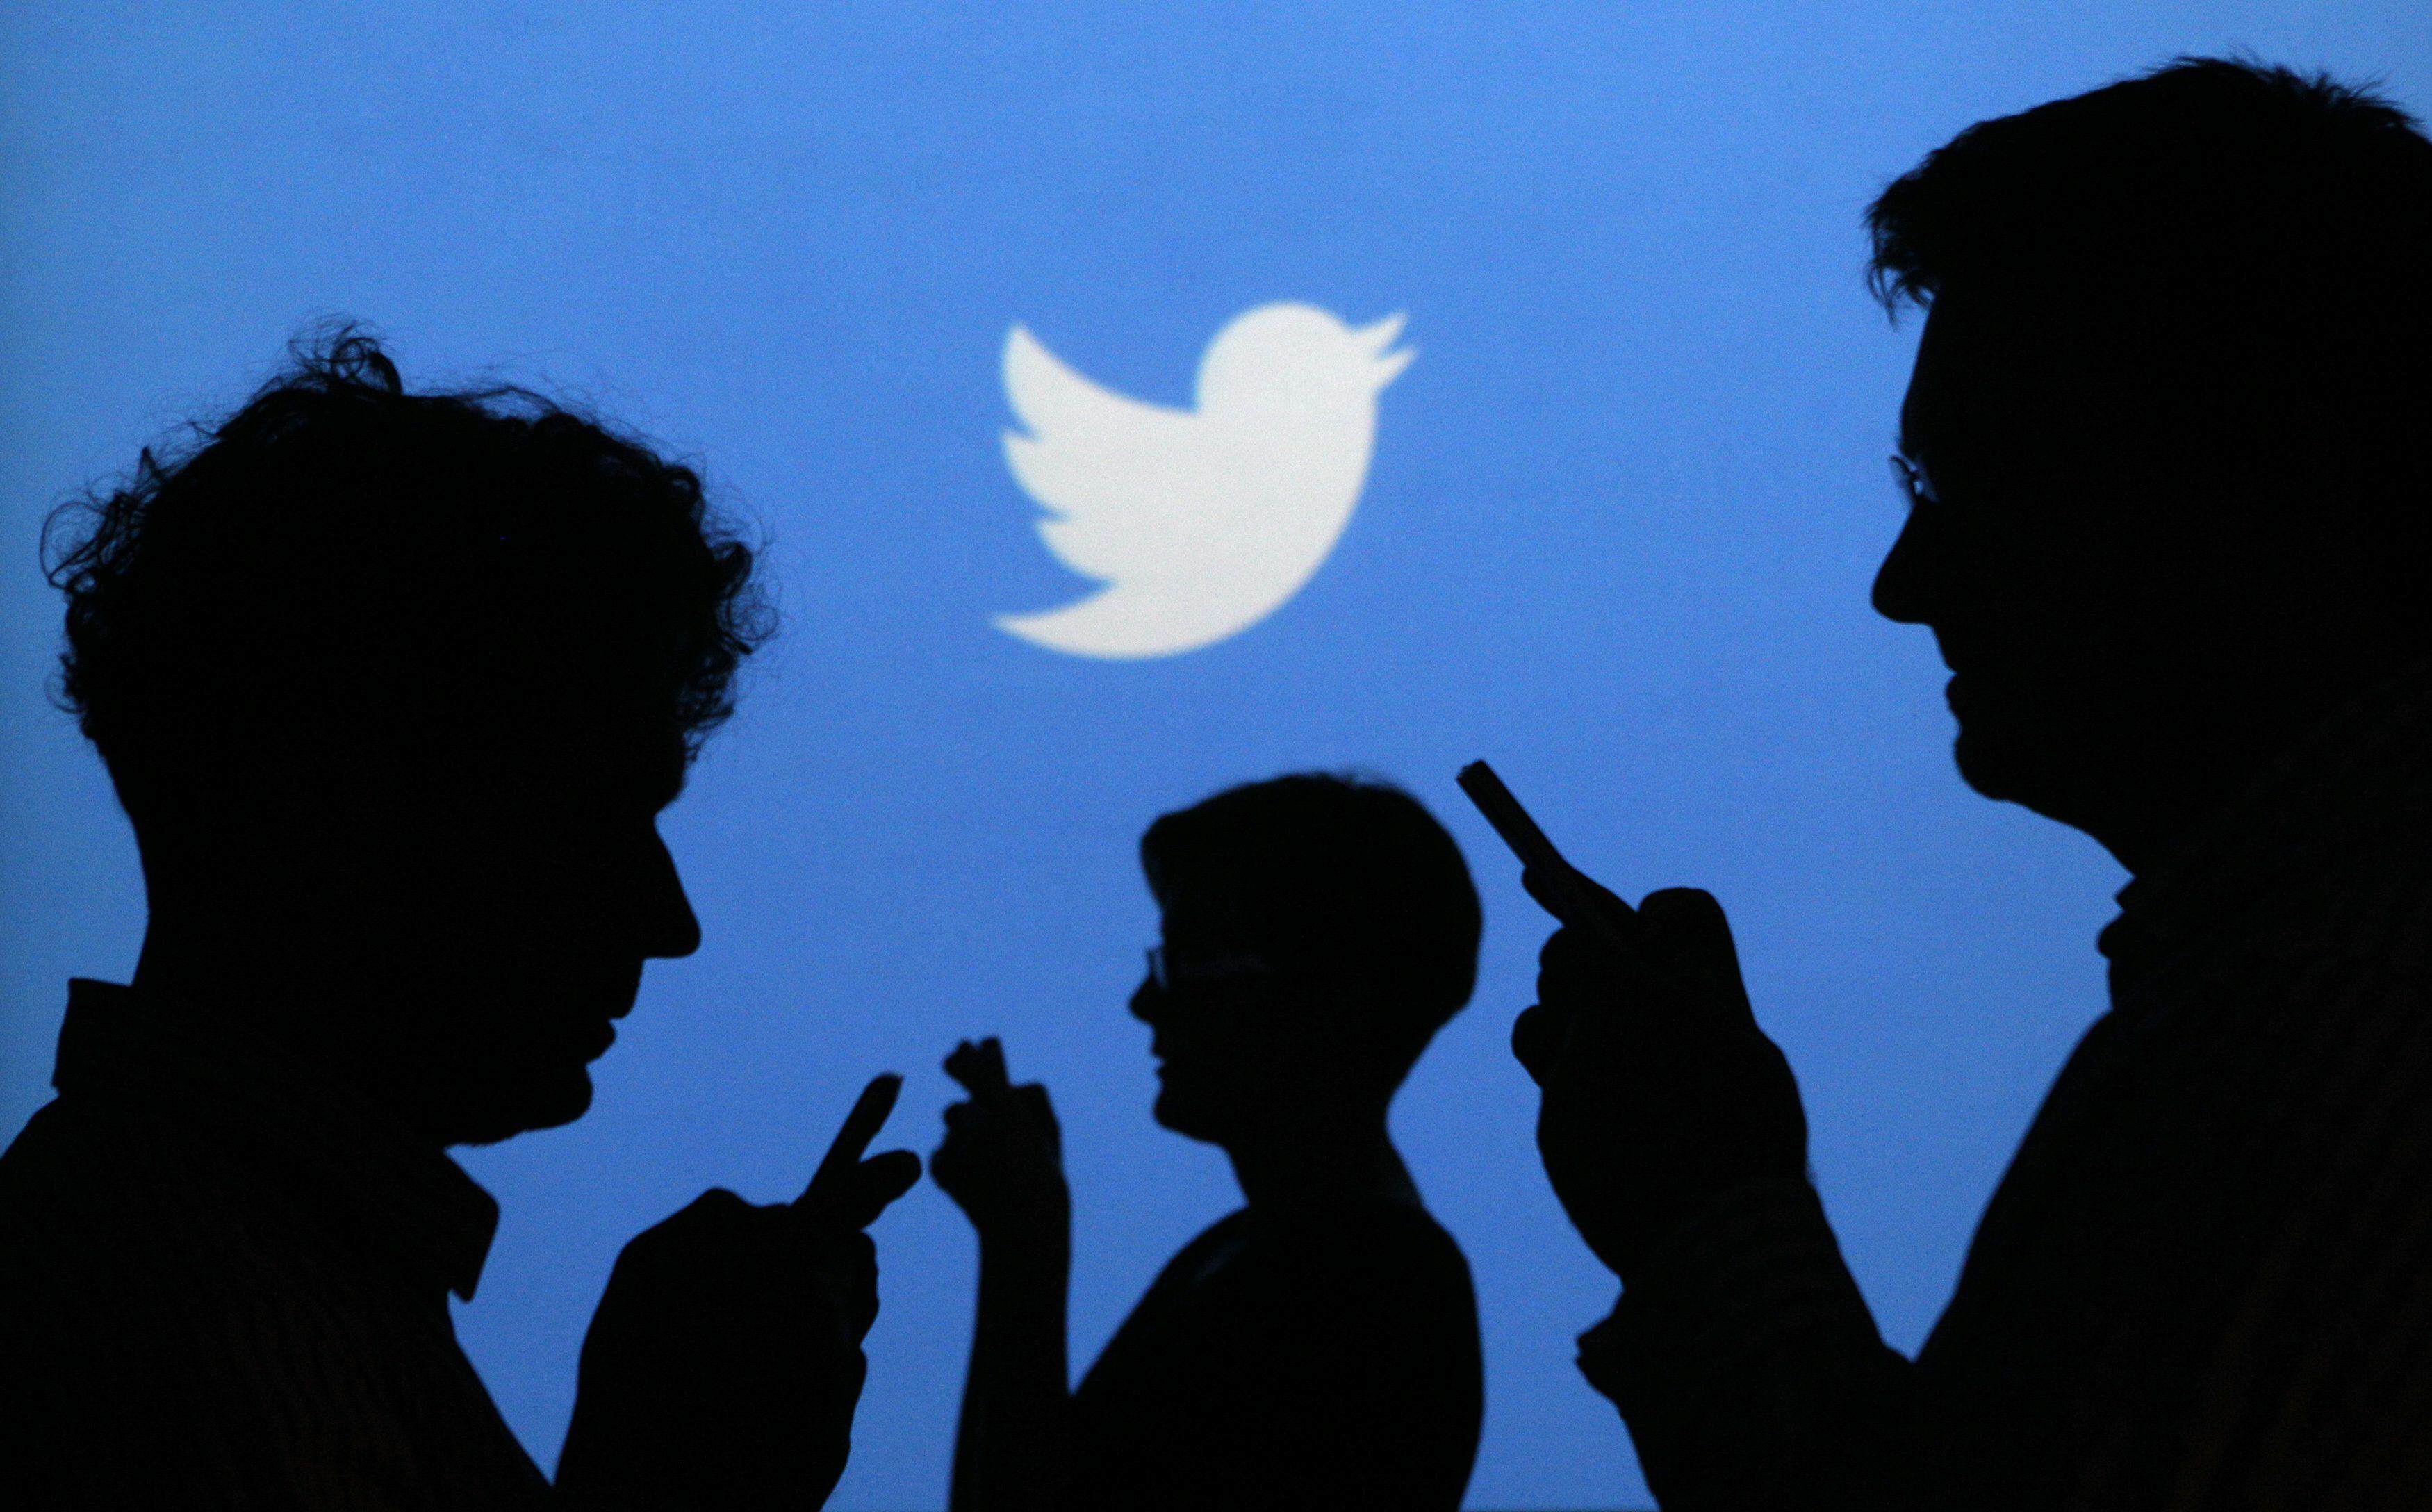 Twitter suspended accounts to tackle extremism